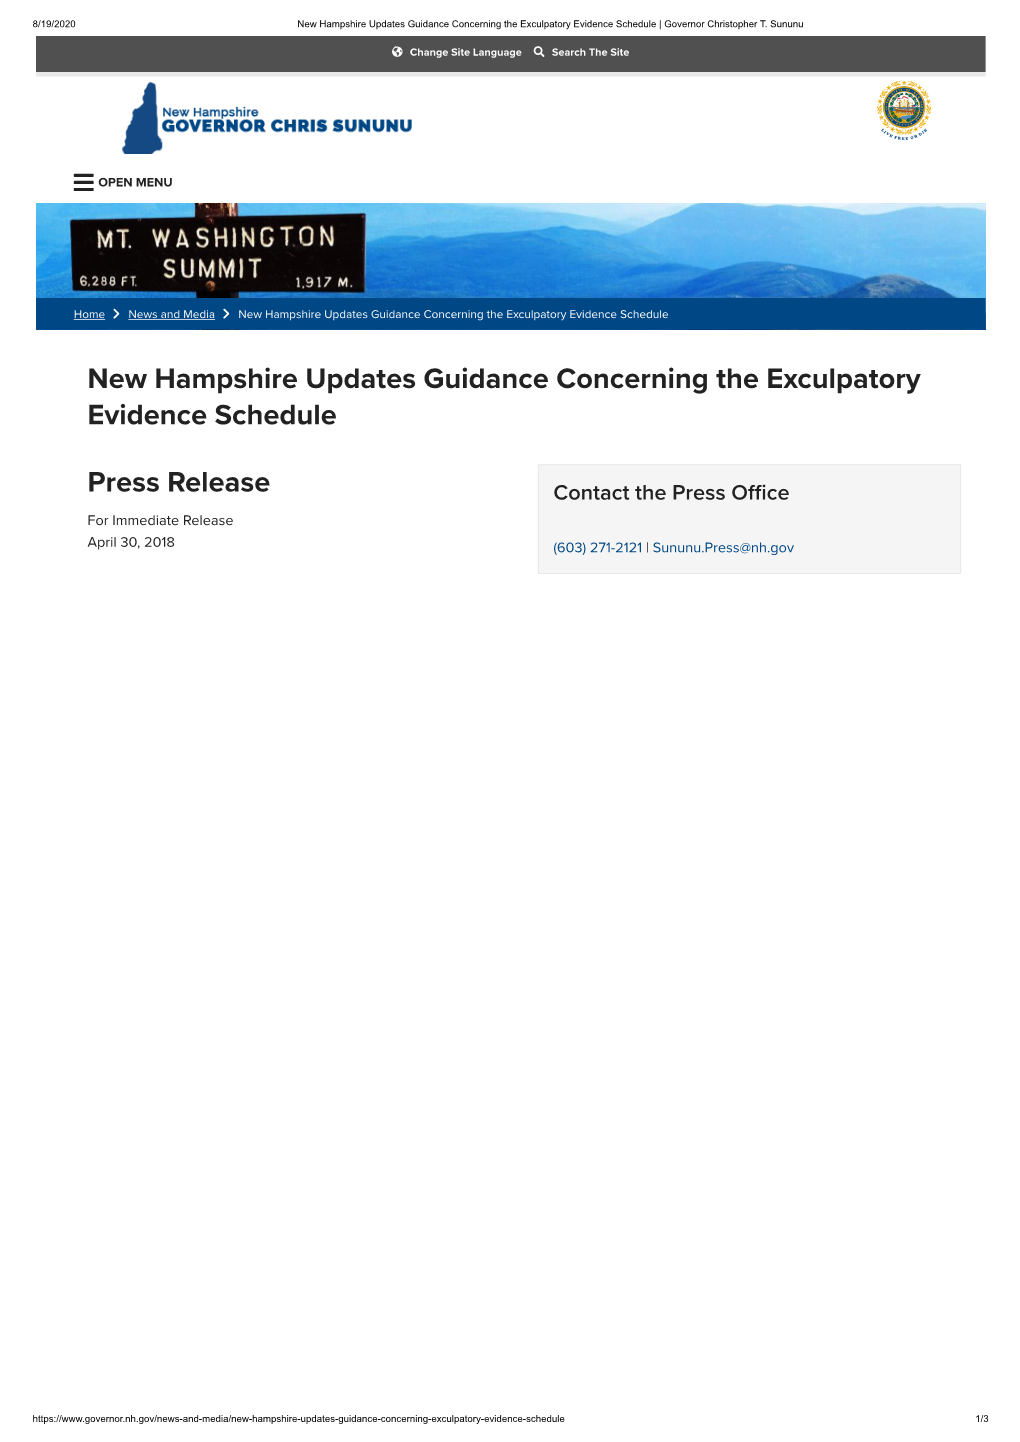 New Hampshire Updates Guidance Concerning the Exculpatory Evidence Schedule | Governor Christopher T. Sununu